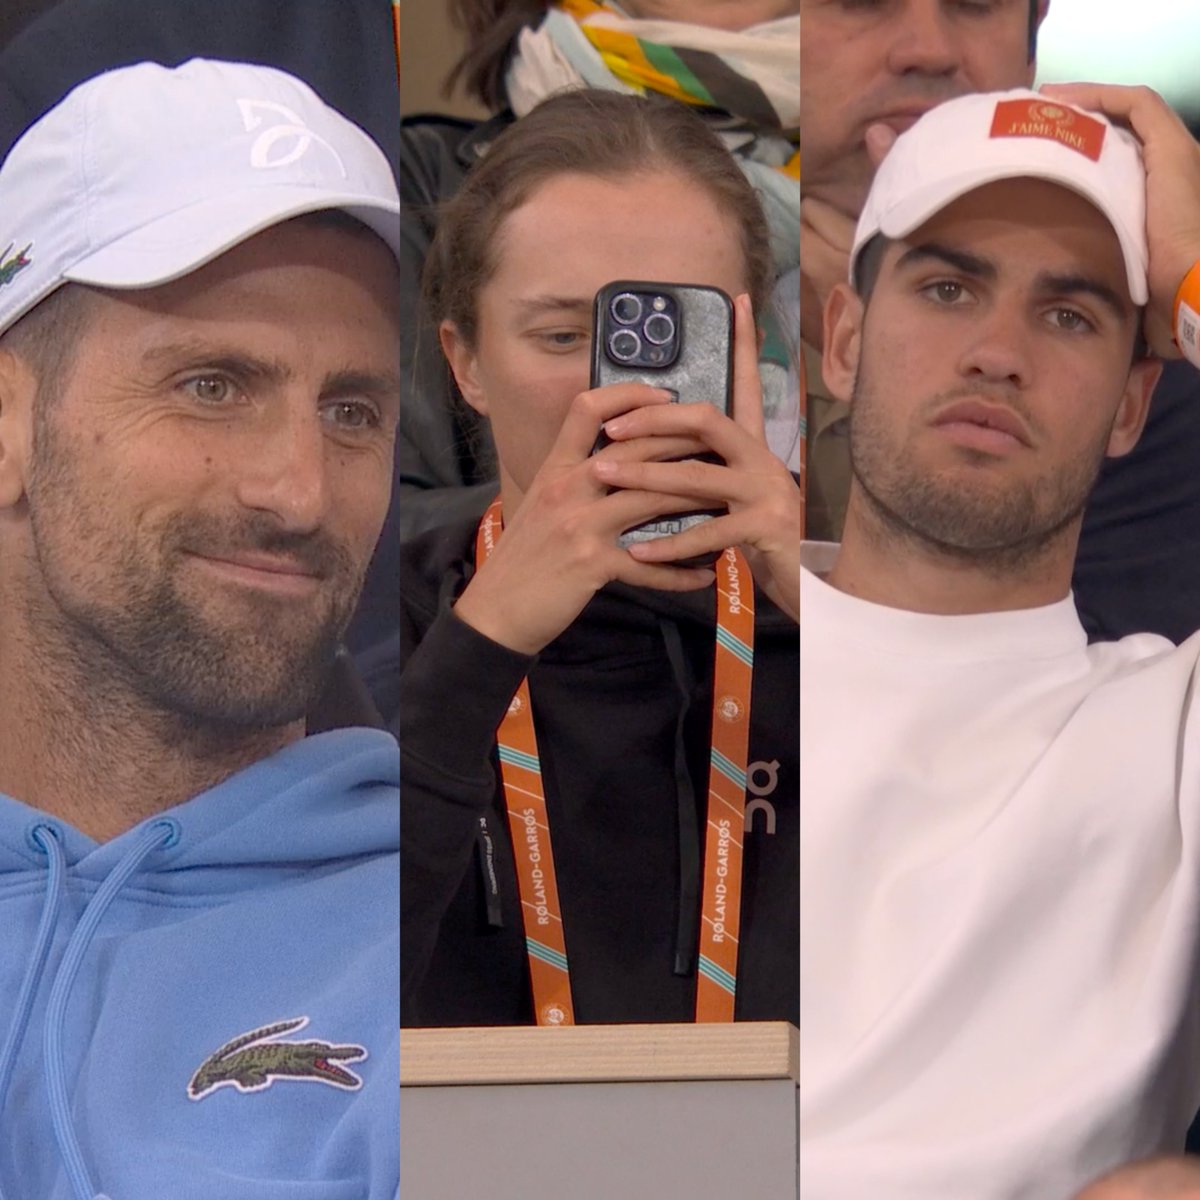 Imagine having these three come out specifically to watch you play